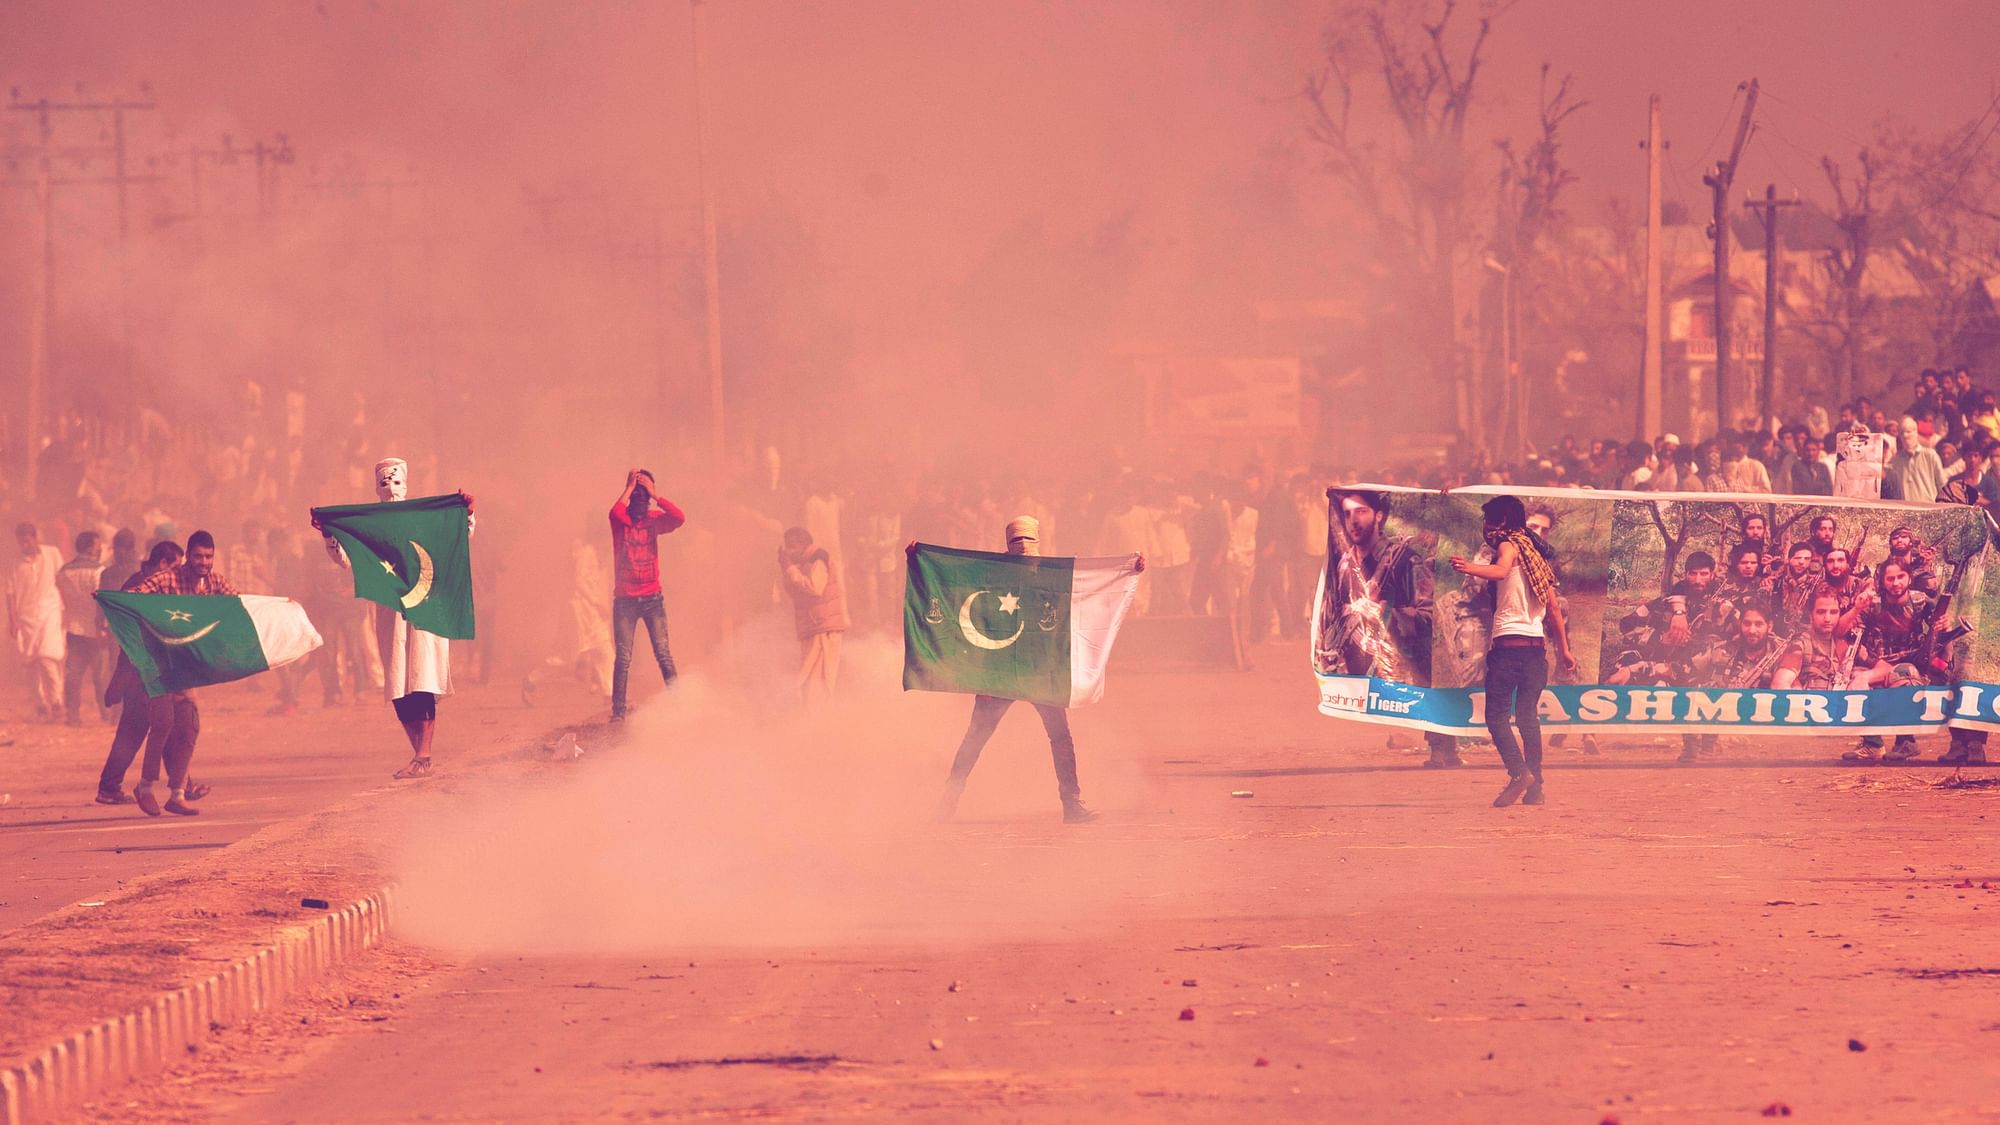  Masked Kashmiris hold the national flag of Pakistan and a banner displaying militant leaders of the Hizb-ul Mujahedeen during a protest.&nbsp;